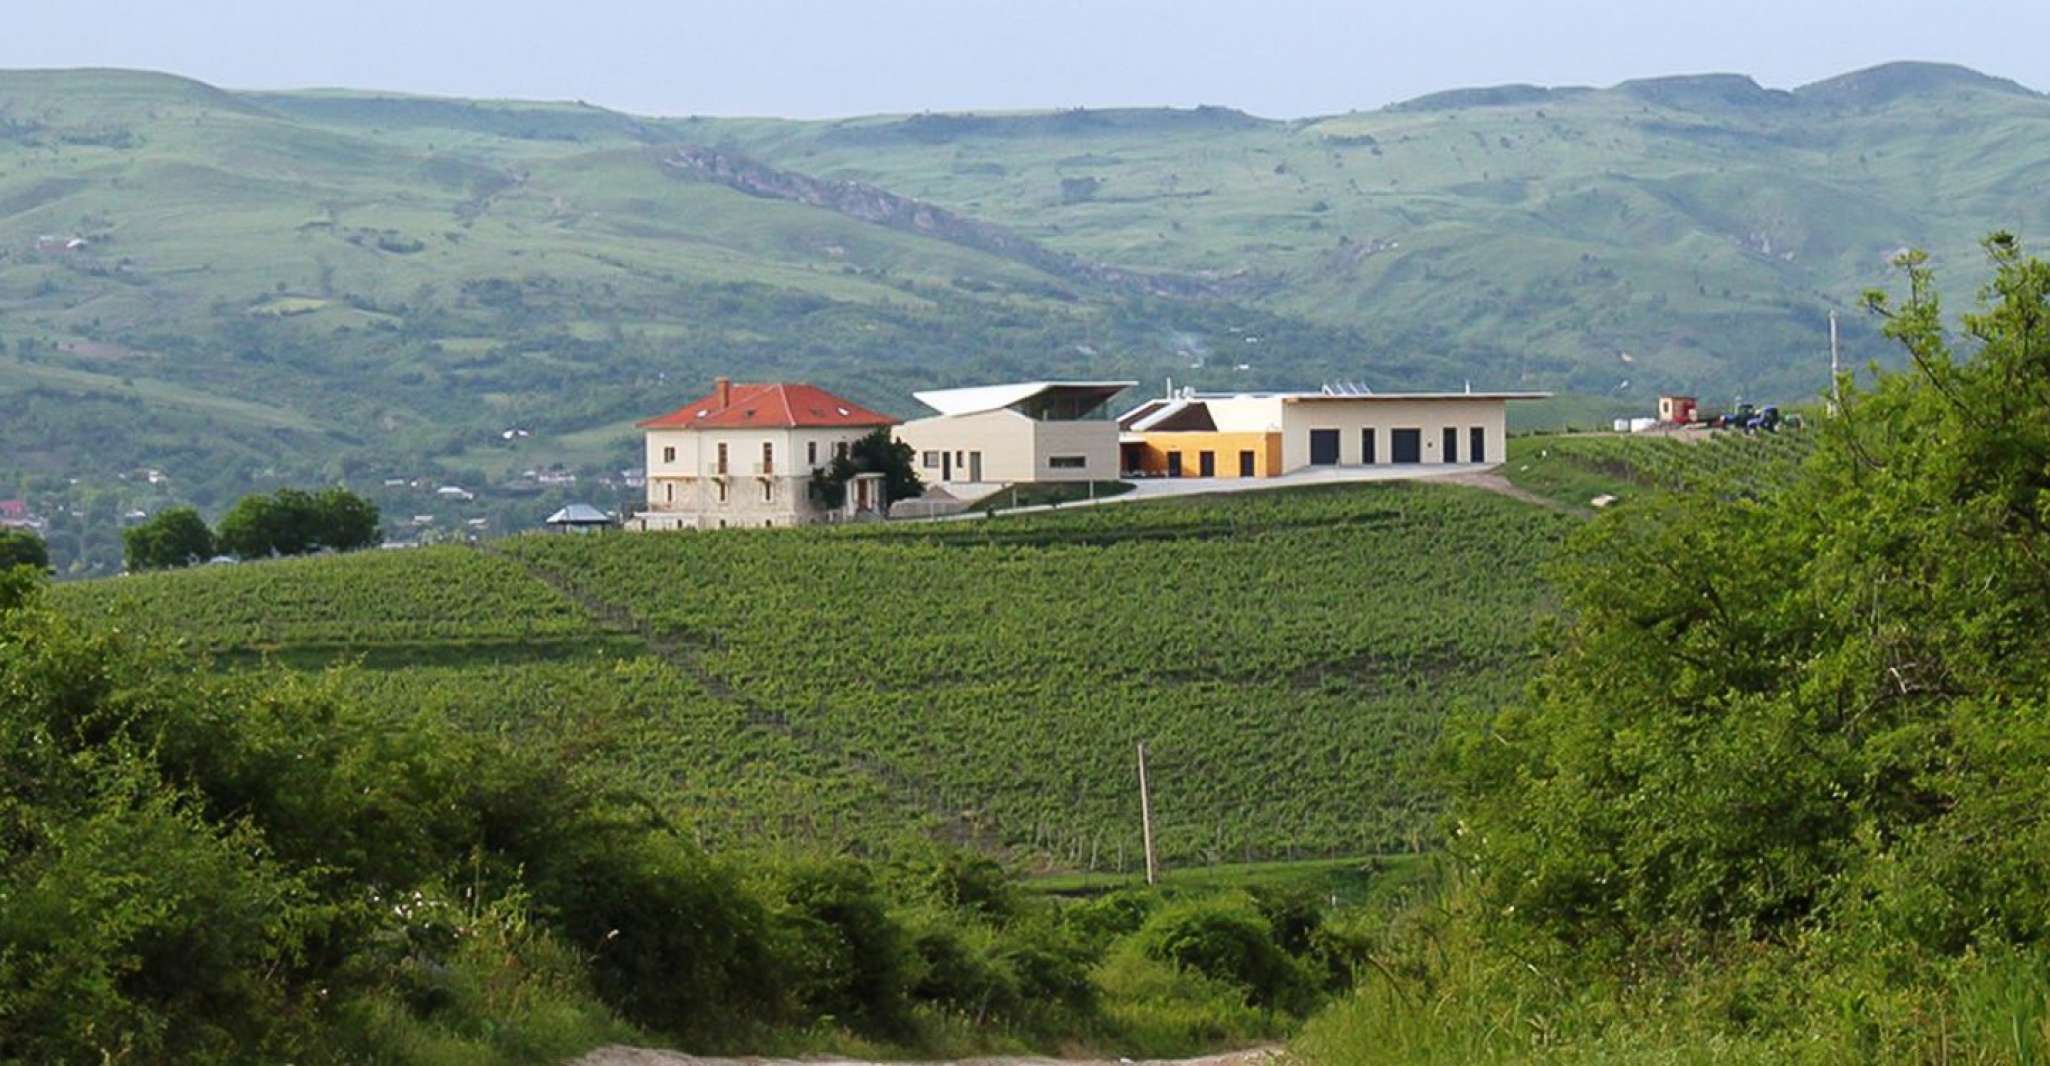 Dealu Mare Wineries, Wine Tasting Tour on the Old Wine Road - Housity